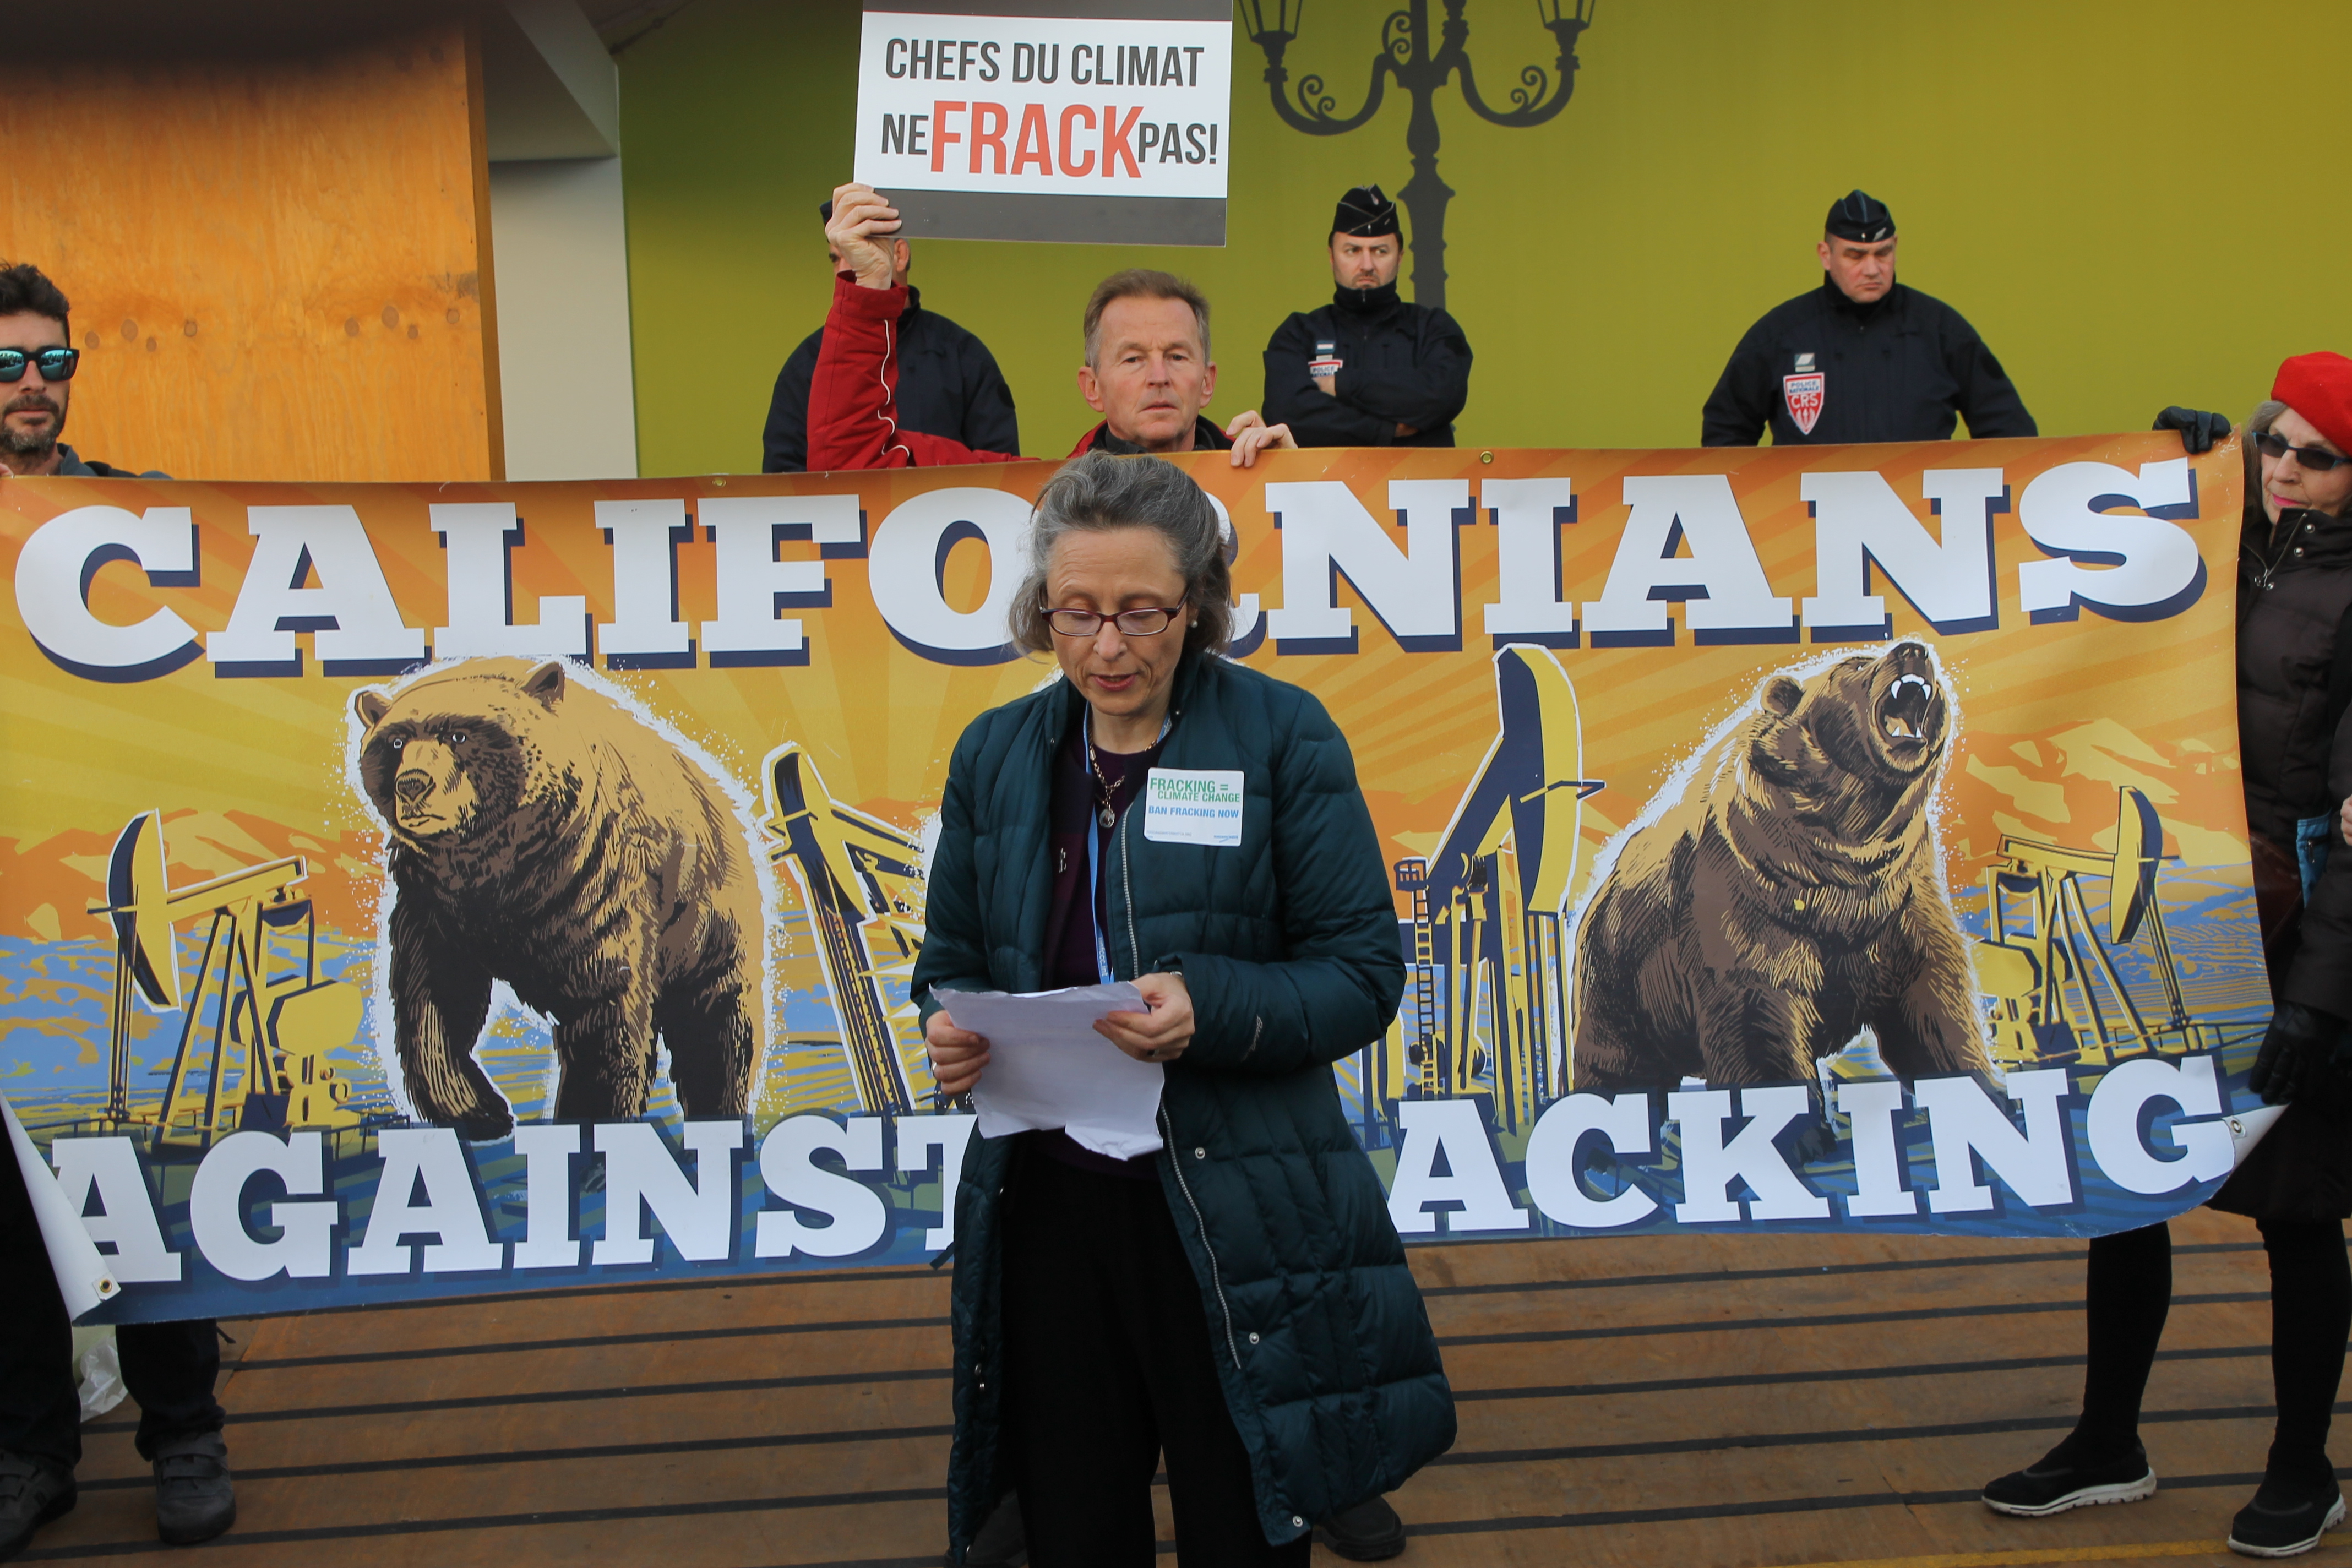 Mercy Sr. Aine O'Connor speaks at an anti-fracking rally outside the main venue of COP21 in France. (NCR photo/Brian Roewe)